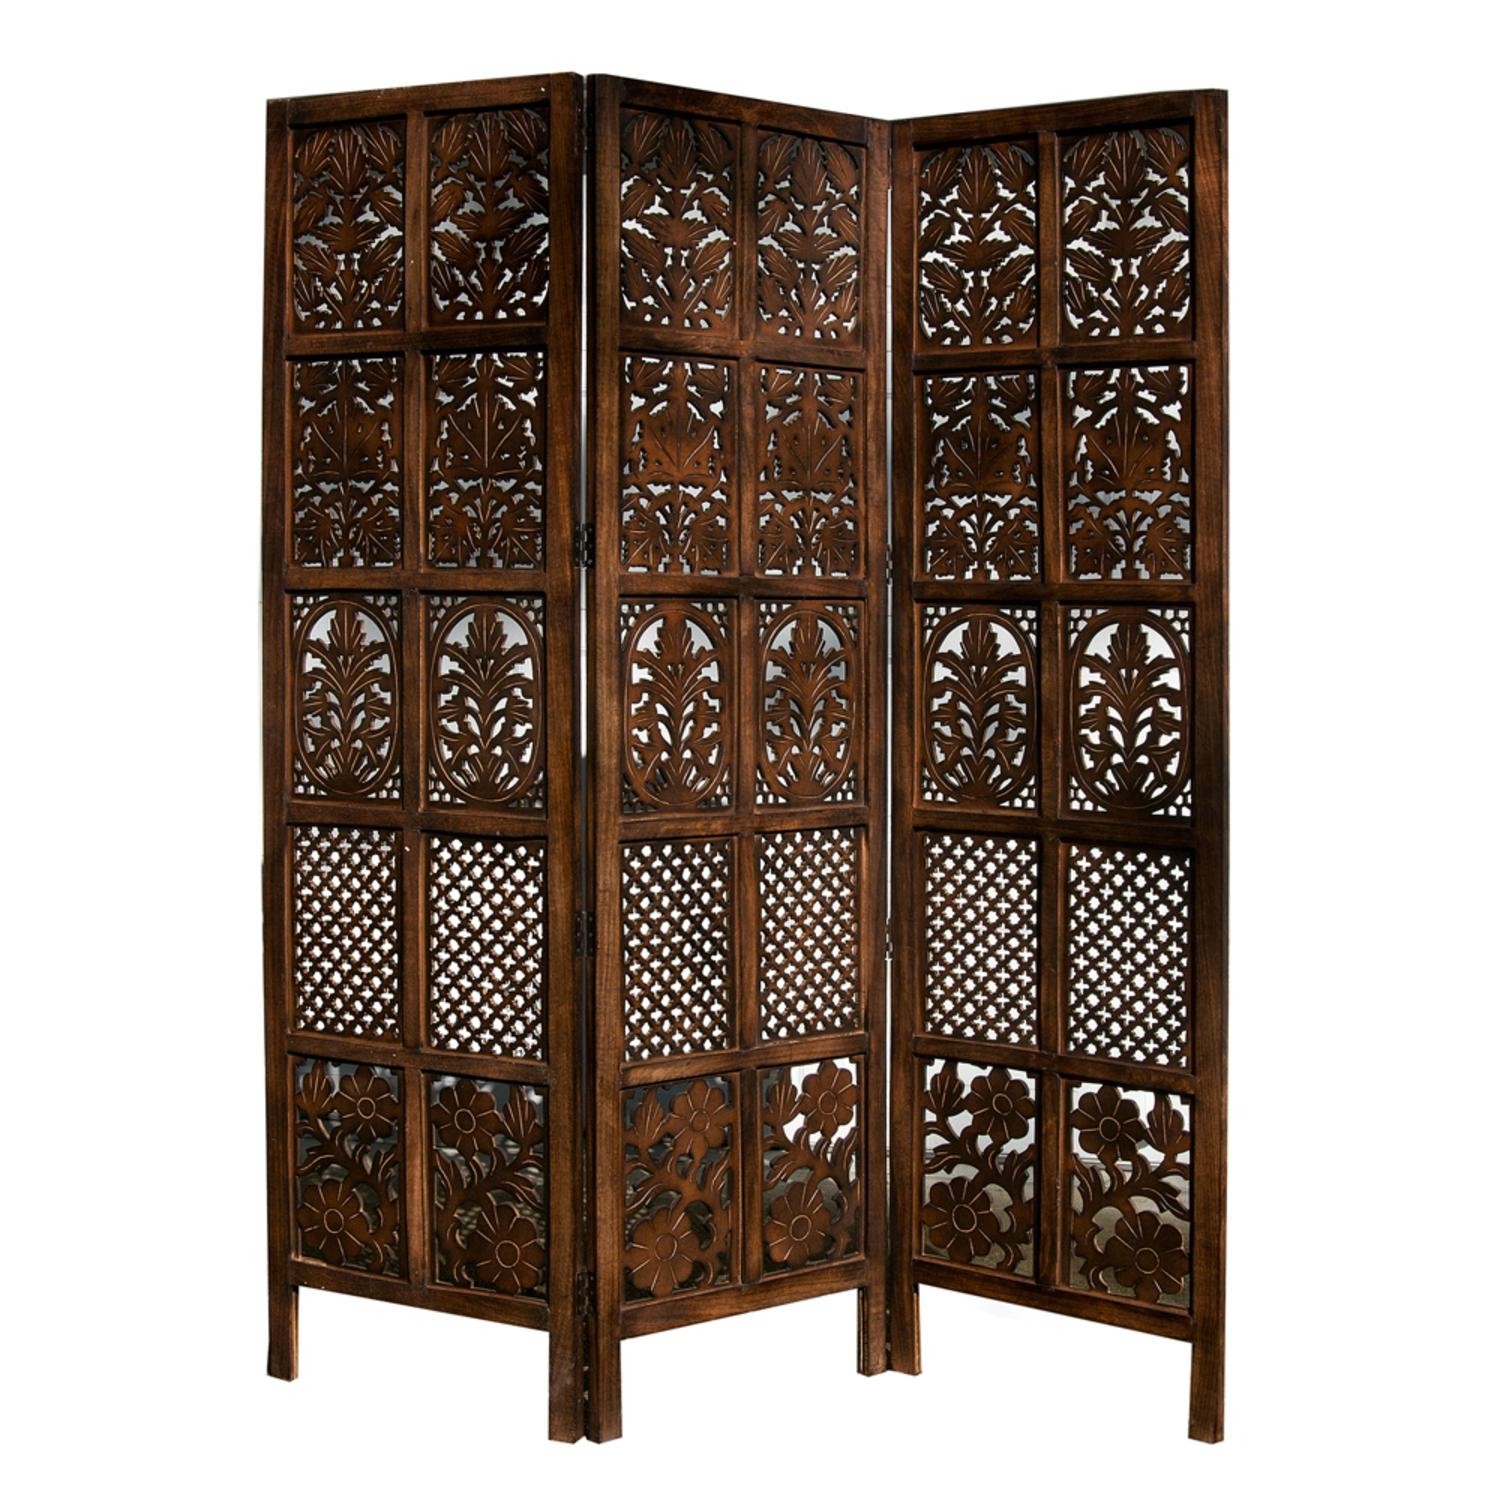 Room divider shoji screen adds instant style to any home